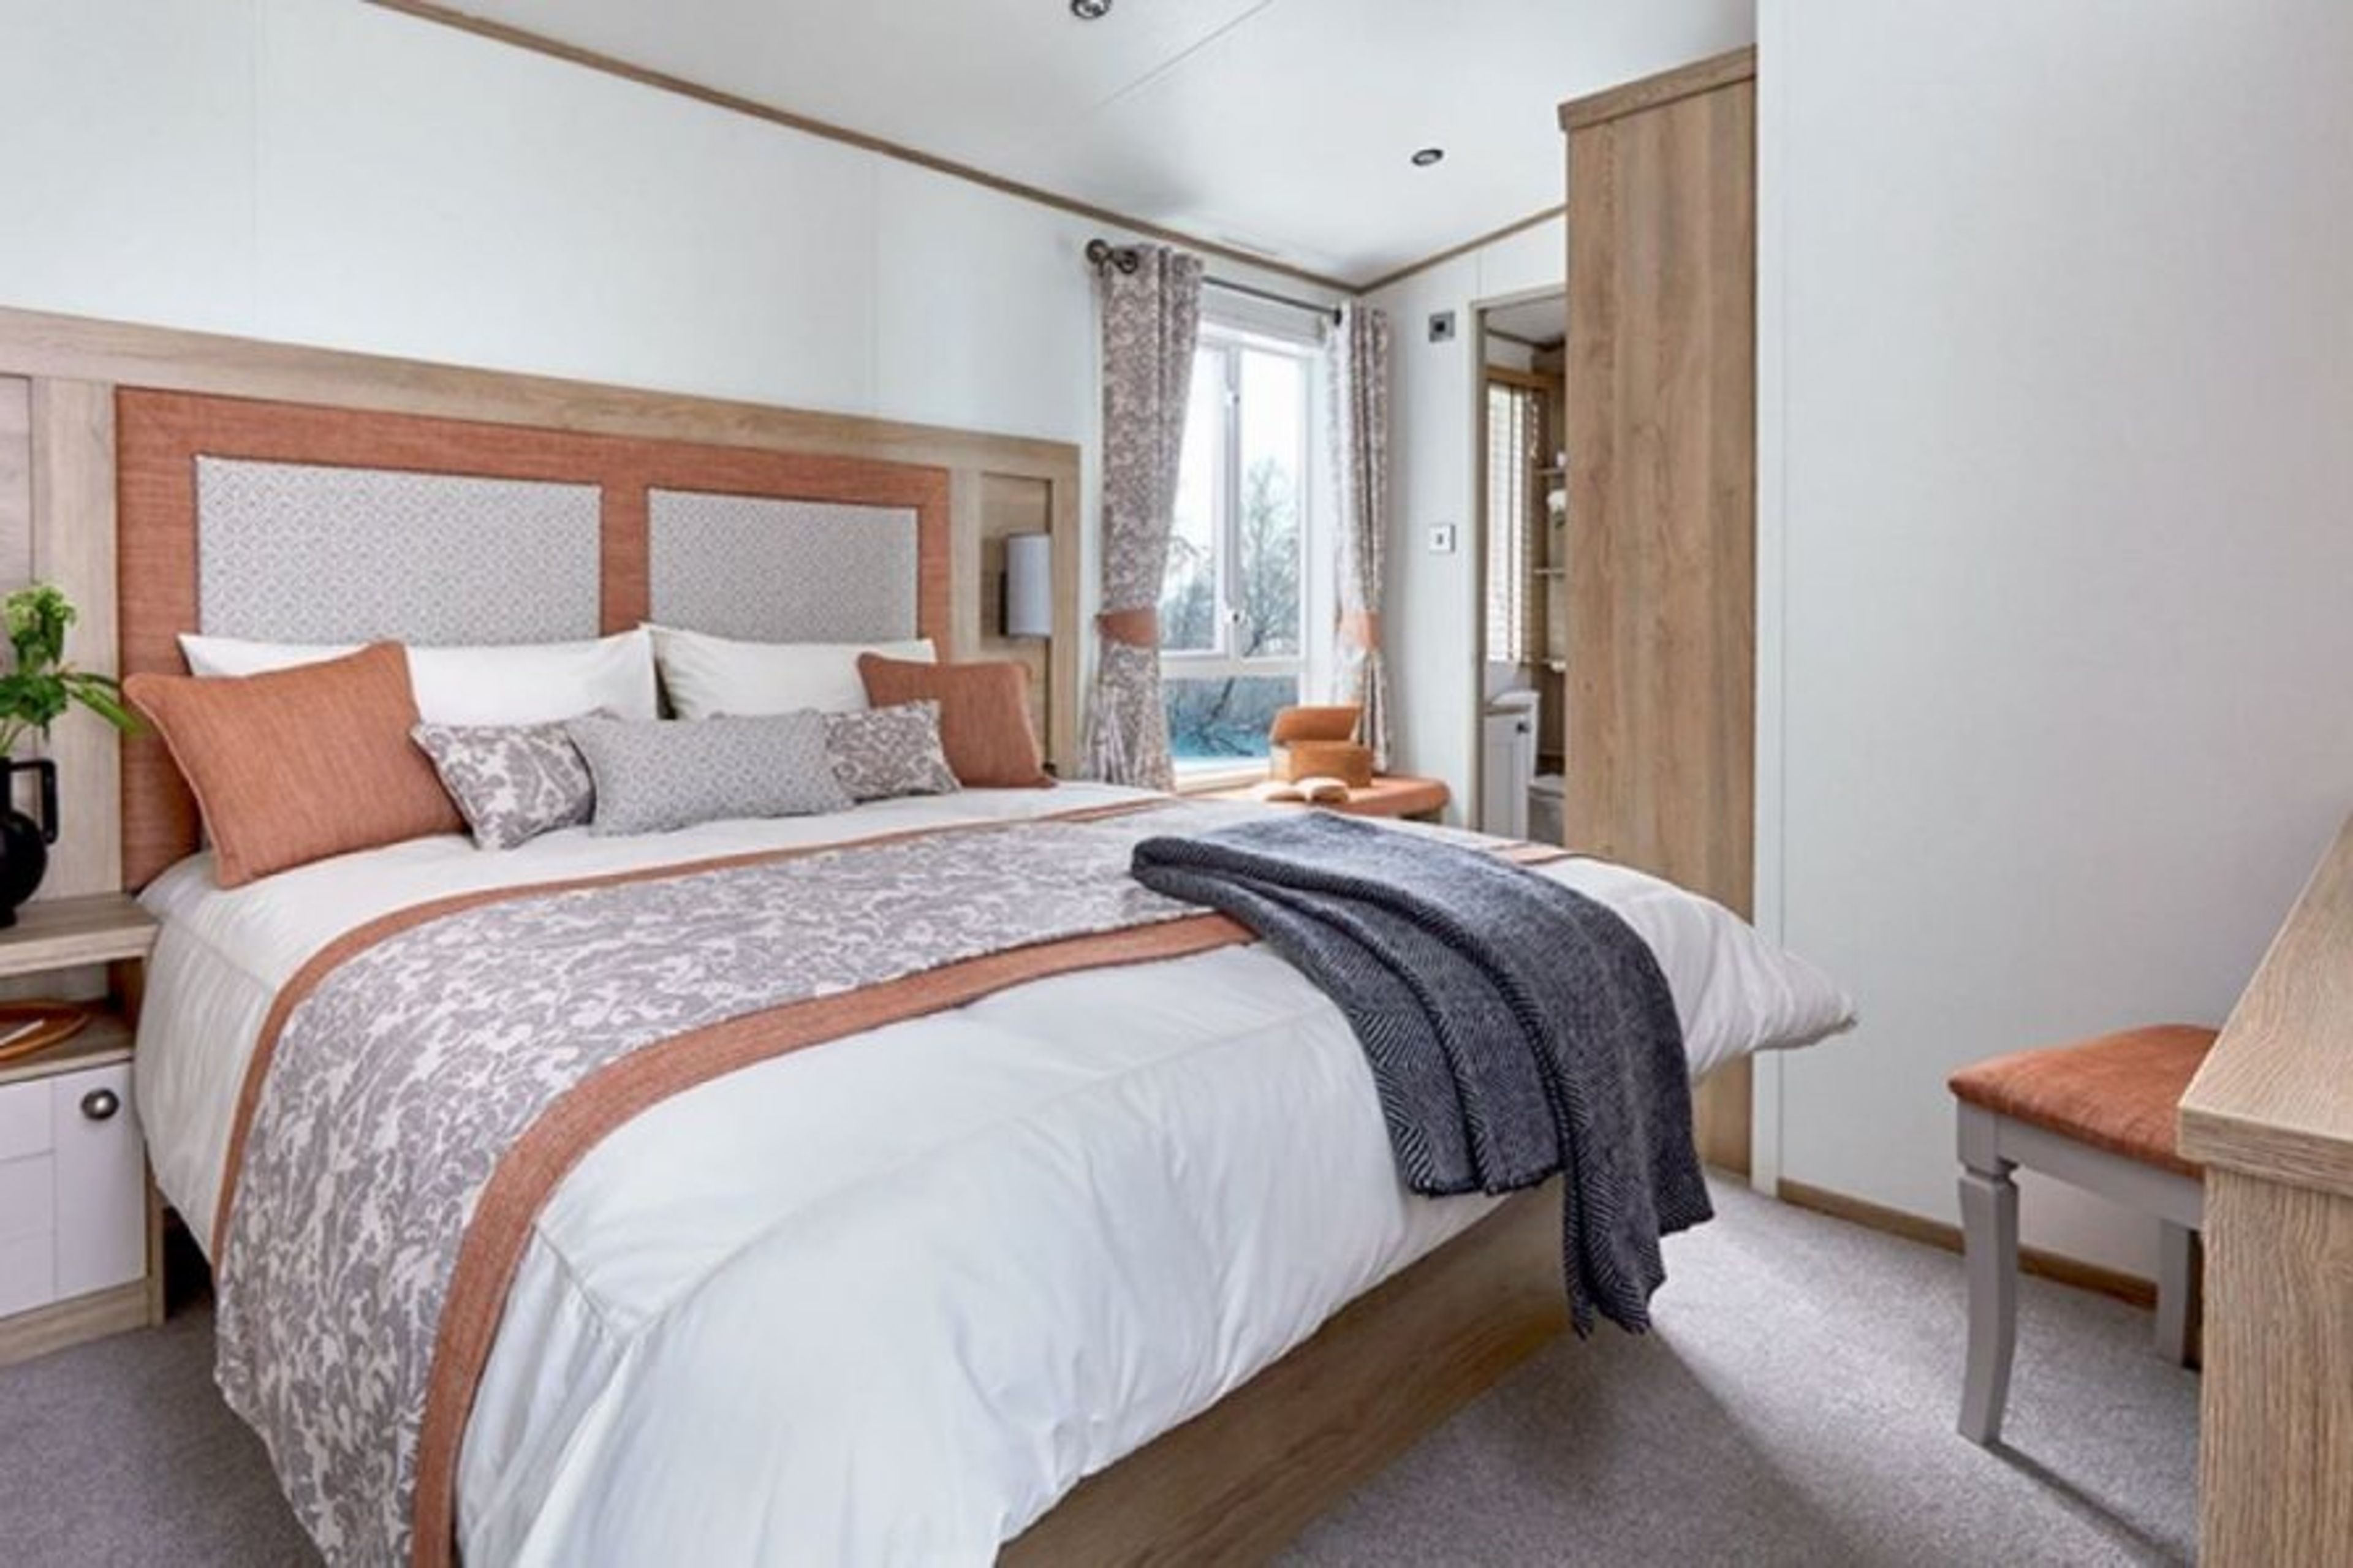 Master bedroom with kingsized bed and ensuite includes shower and WC